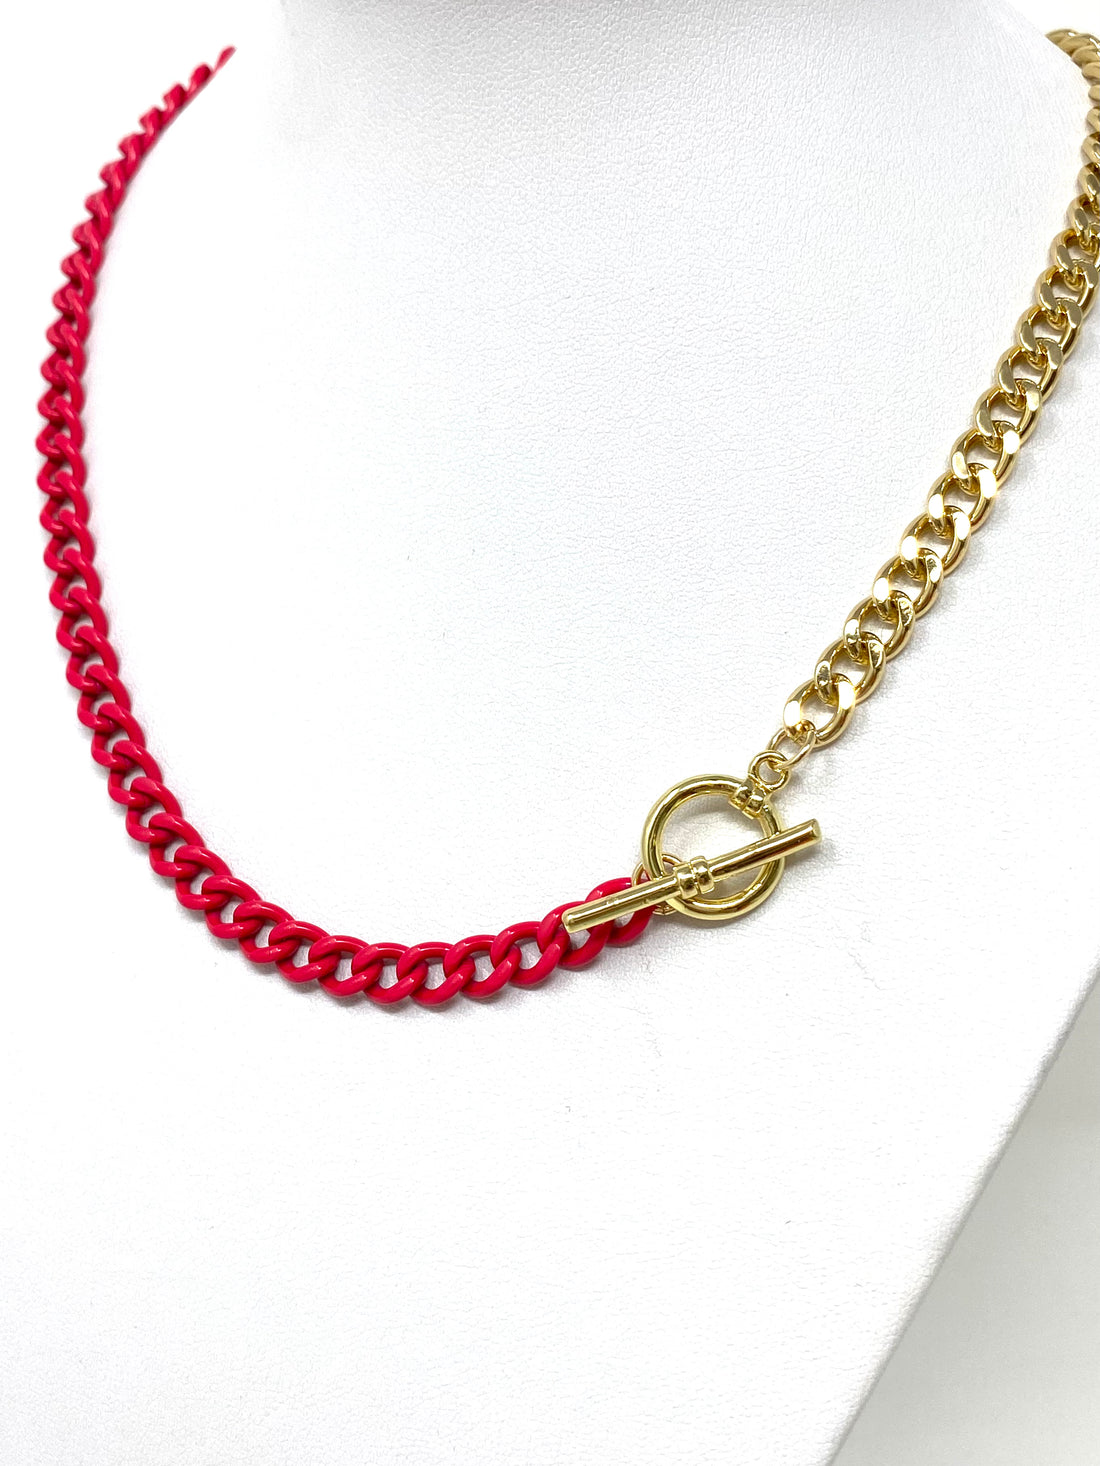 Dylan Half and Half Curb Chain with Toggle in Hot Pink